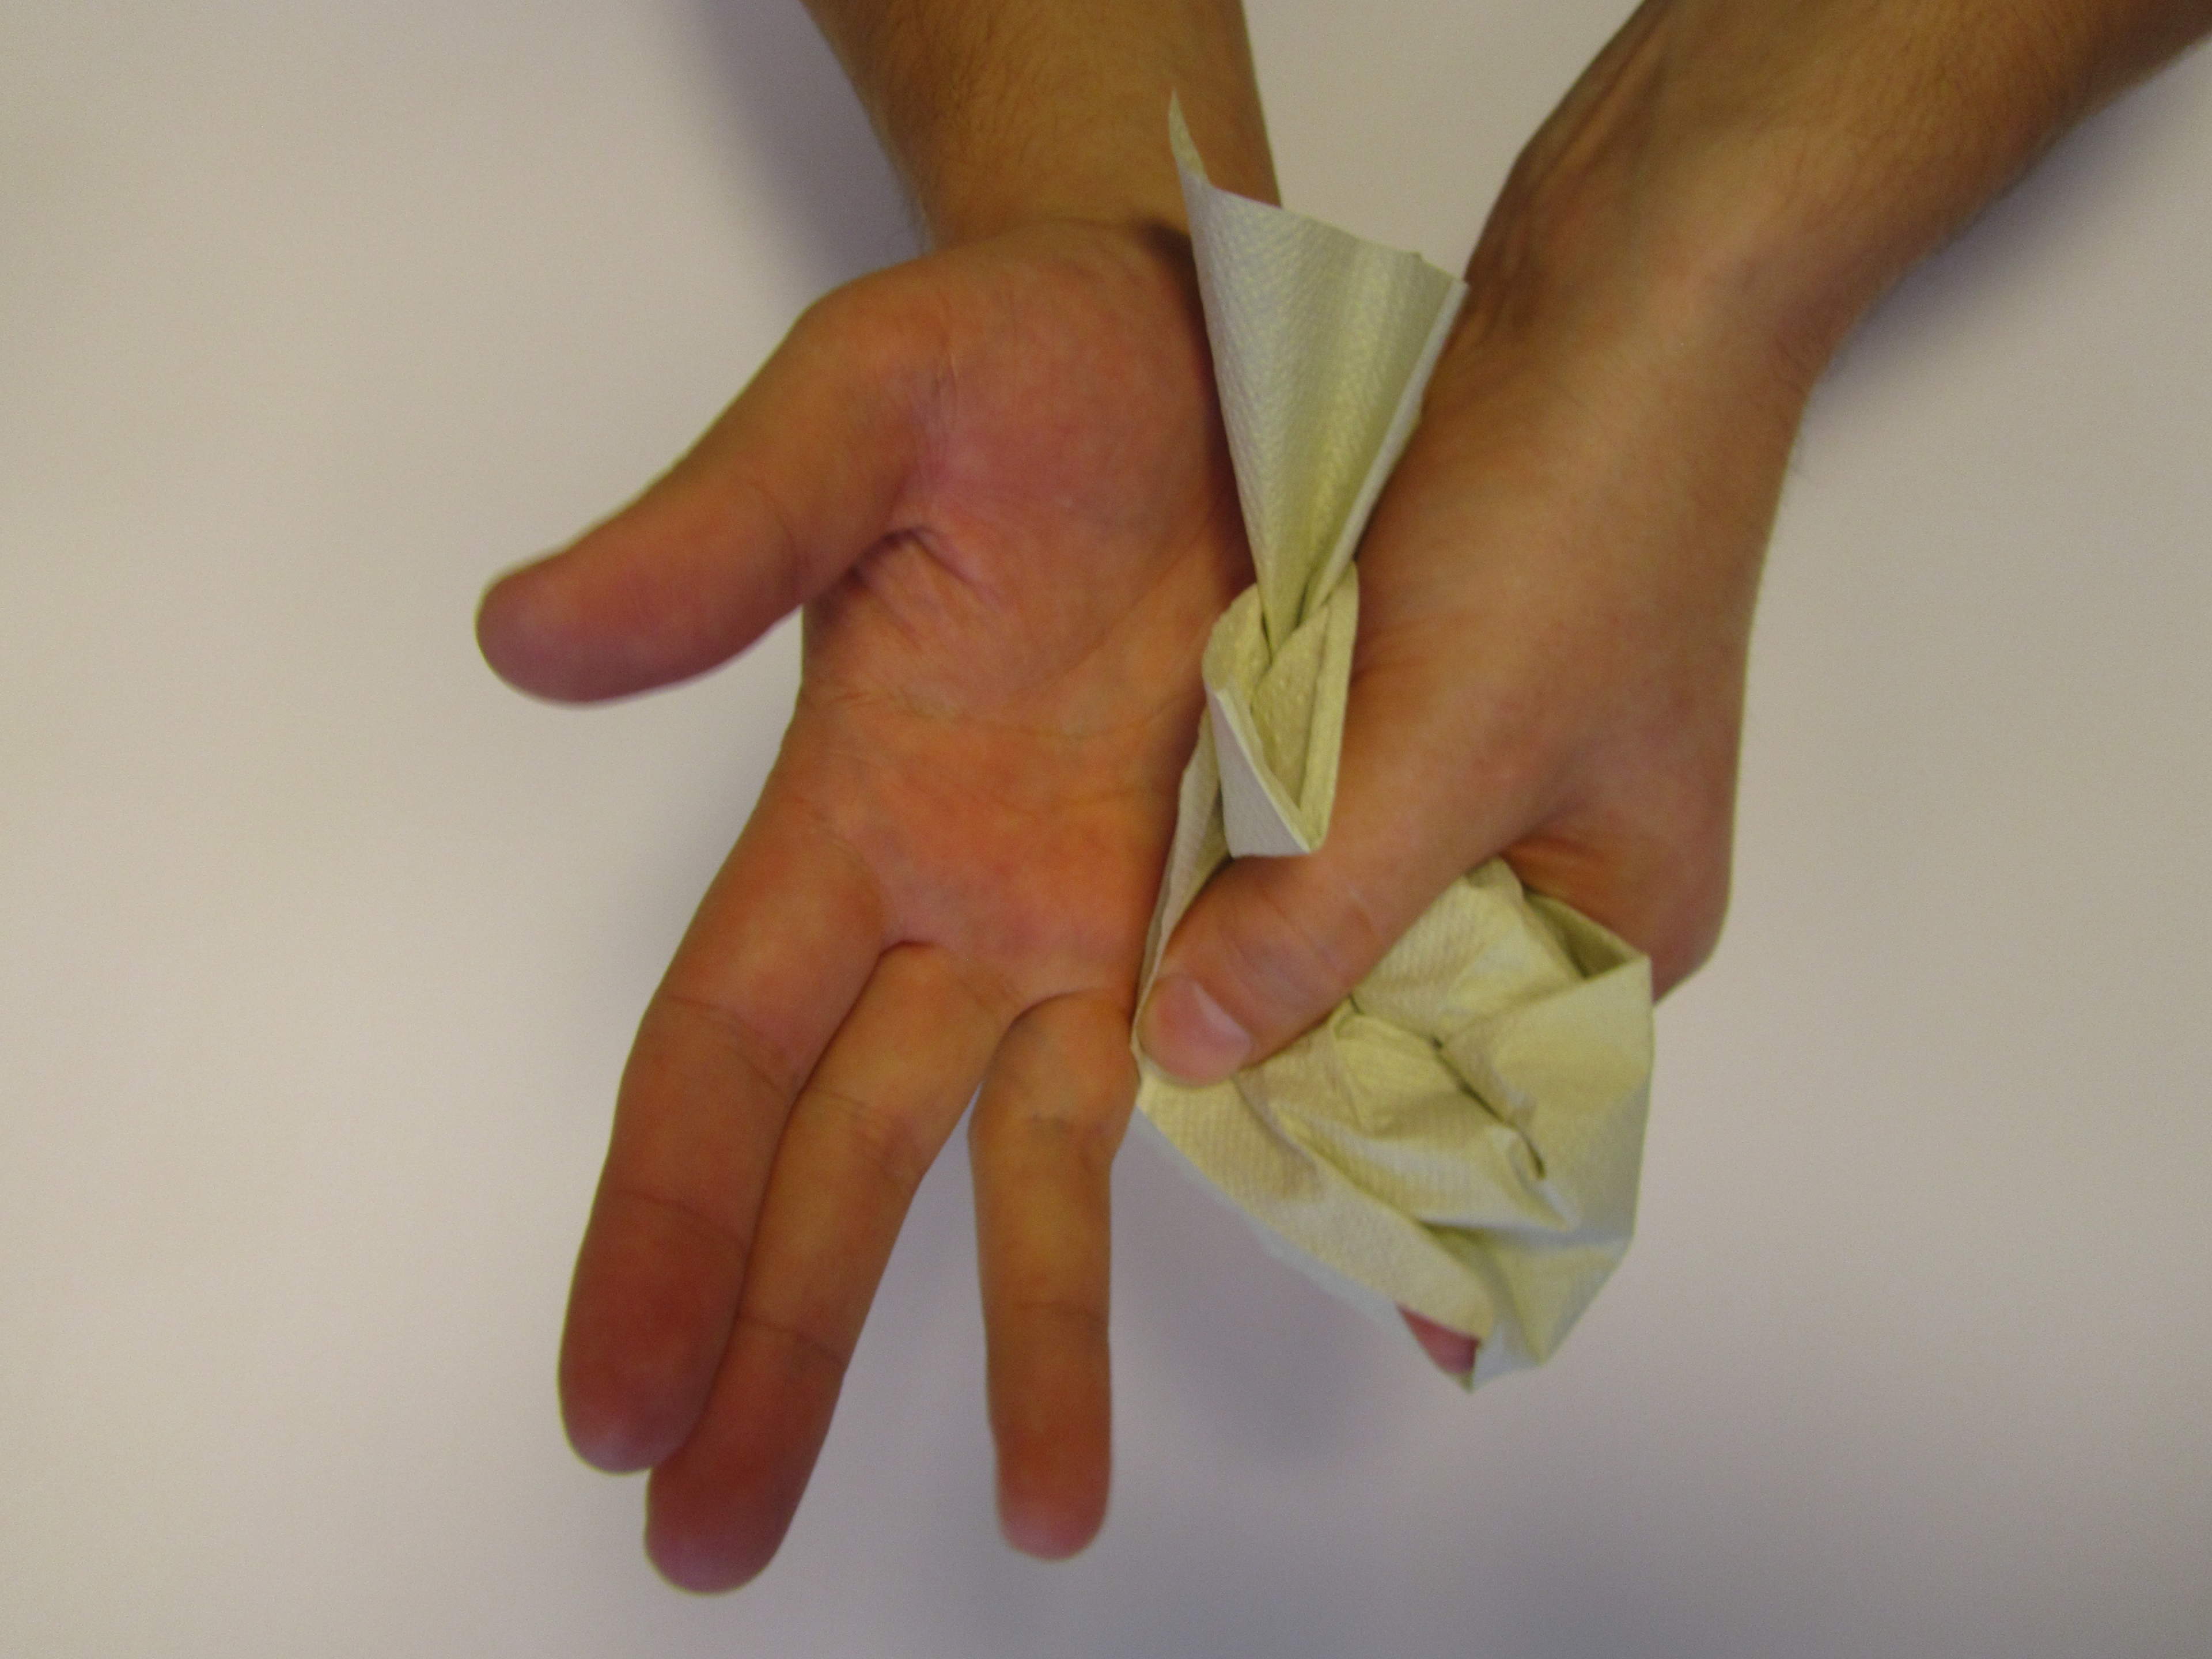 In the image are hands that are being dried with disposable paper towels.